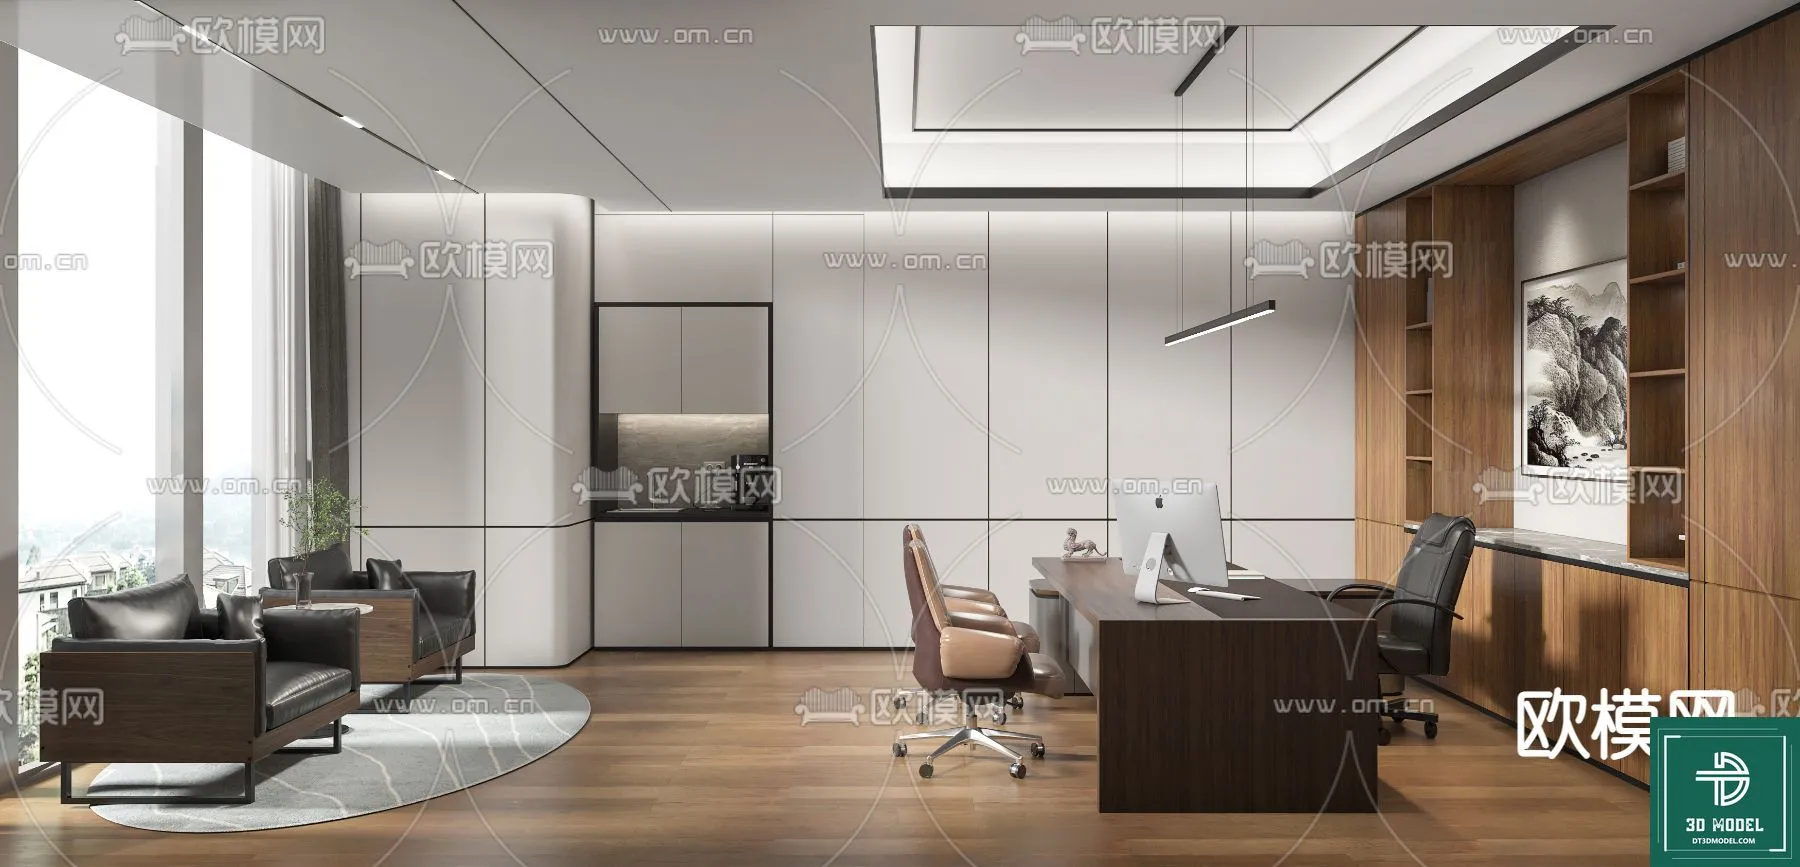 OFFICE ROOM FOR MANAGER – 3DMODEL – 081